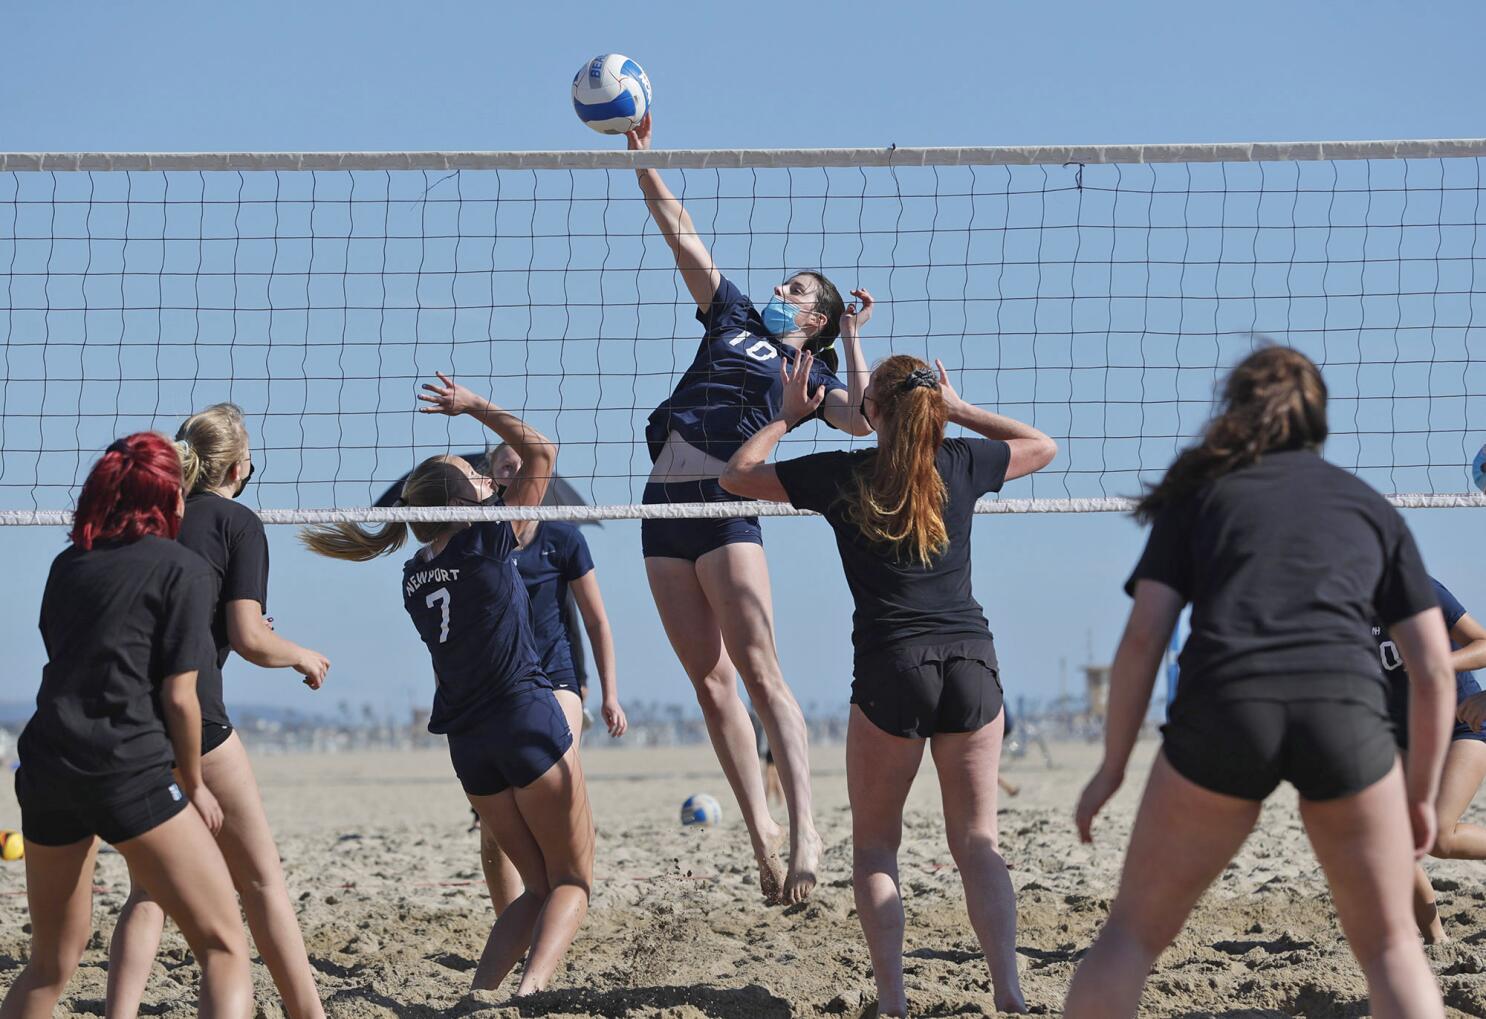 LA County Beaches Volleyball Courts – Beaches & Harbors